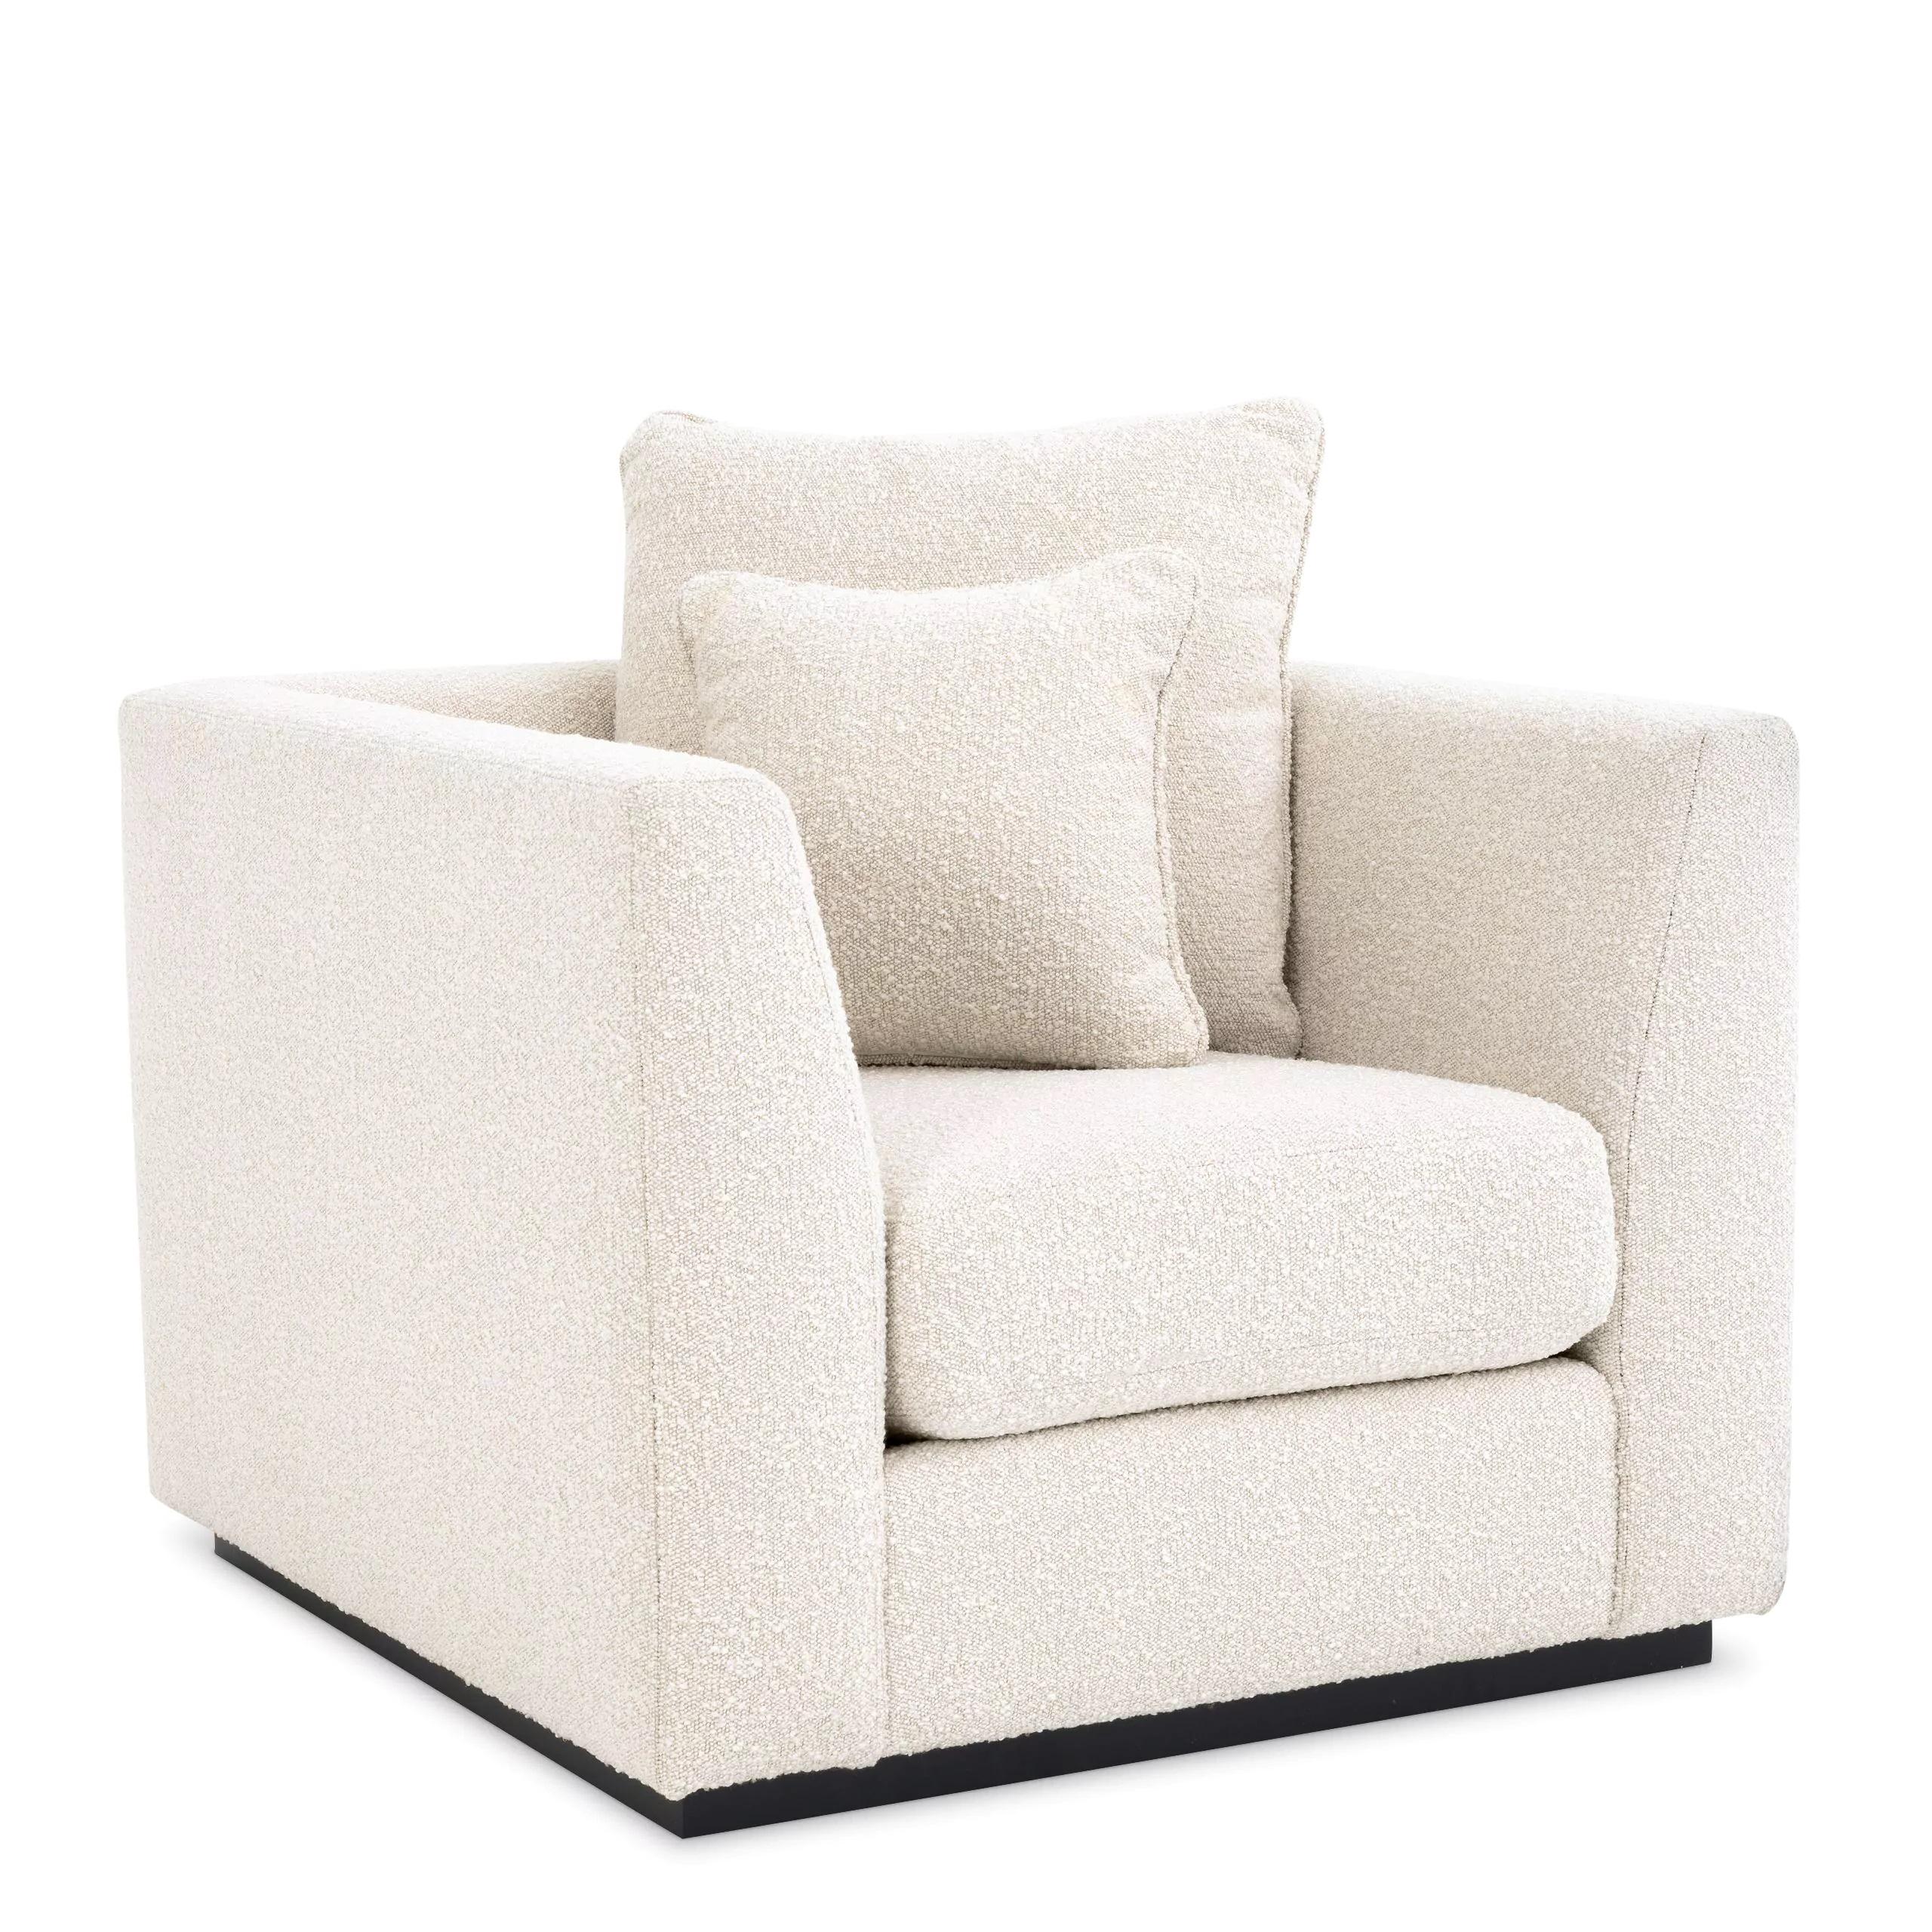 Black wooden feet and beige bouclé fabric armchair comfy, minimalist and in a modern club chair style.